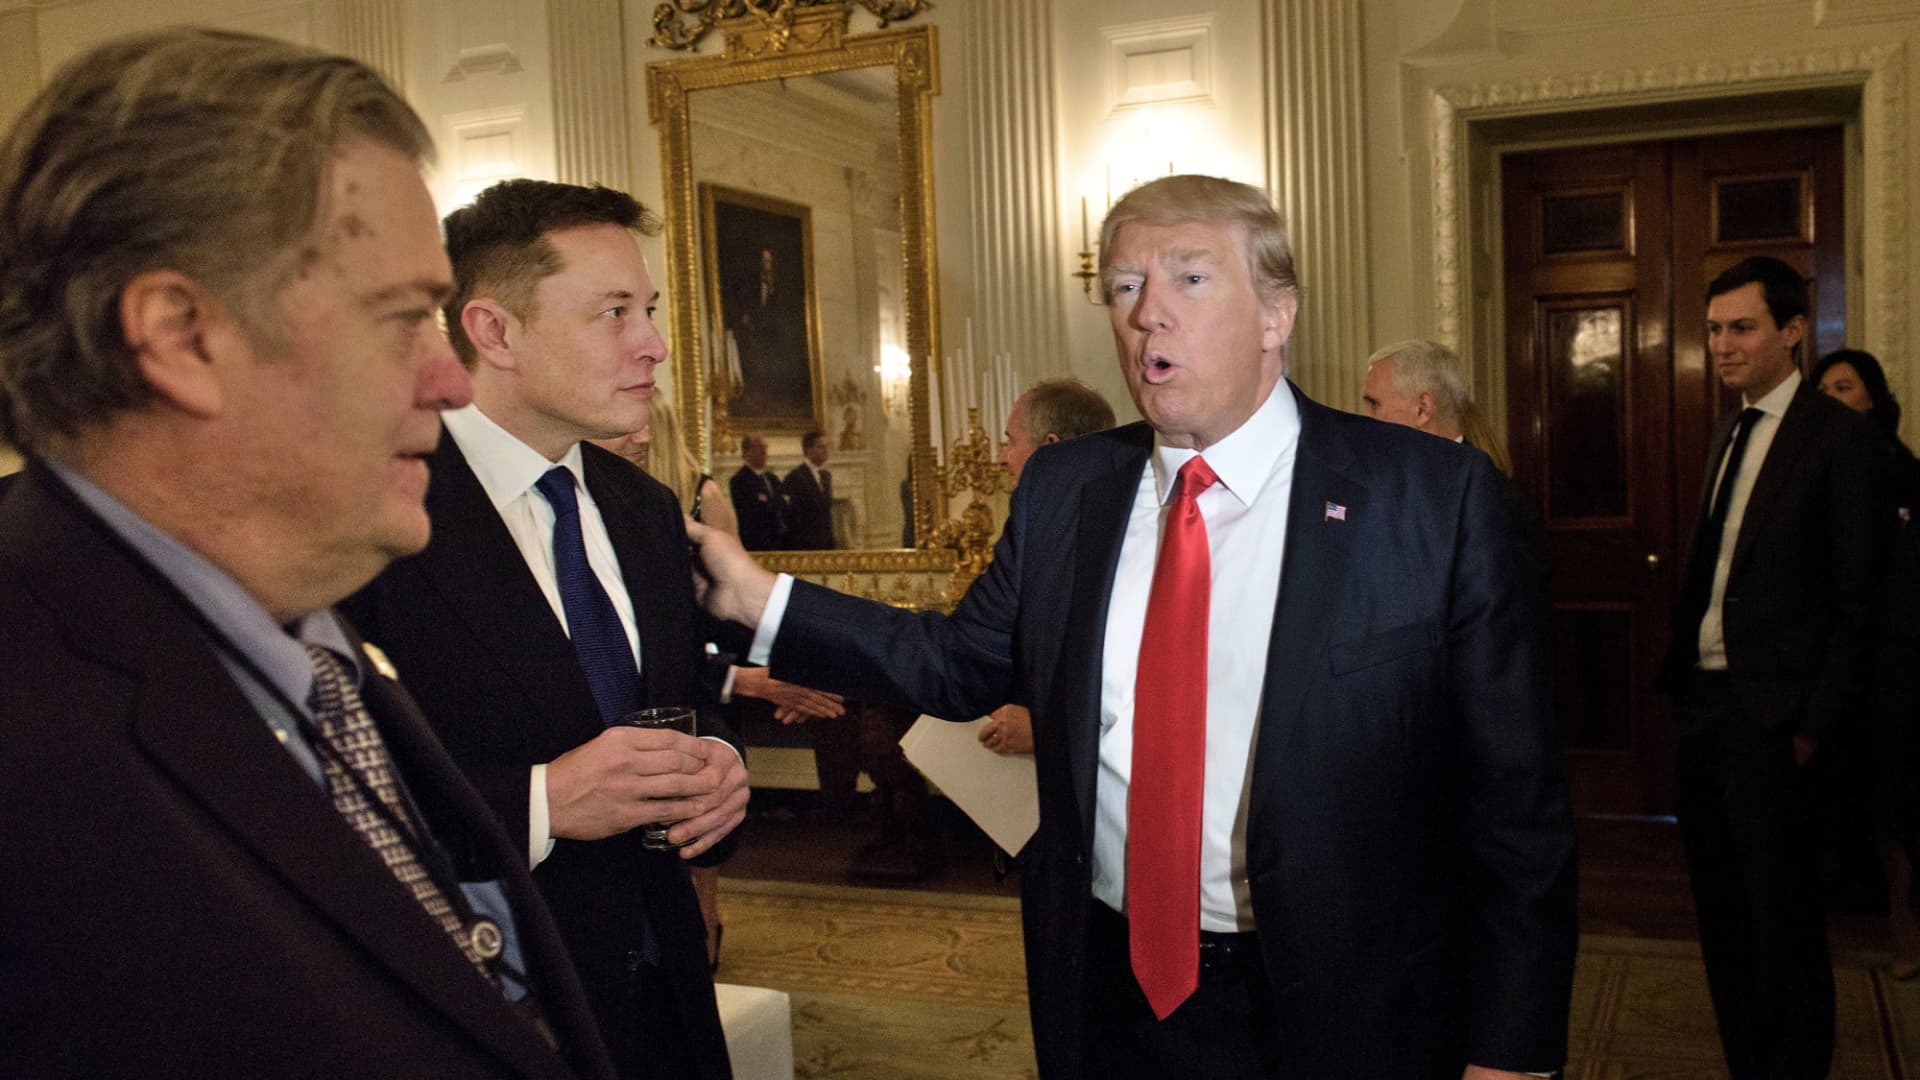 Trump wants Elon Musk to speak at Republican convention